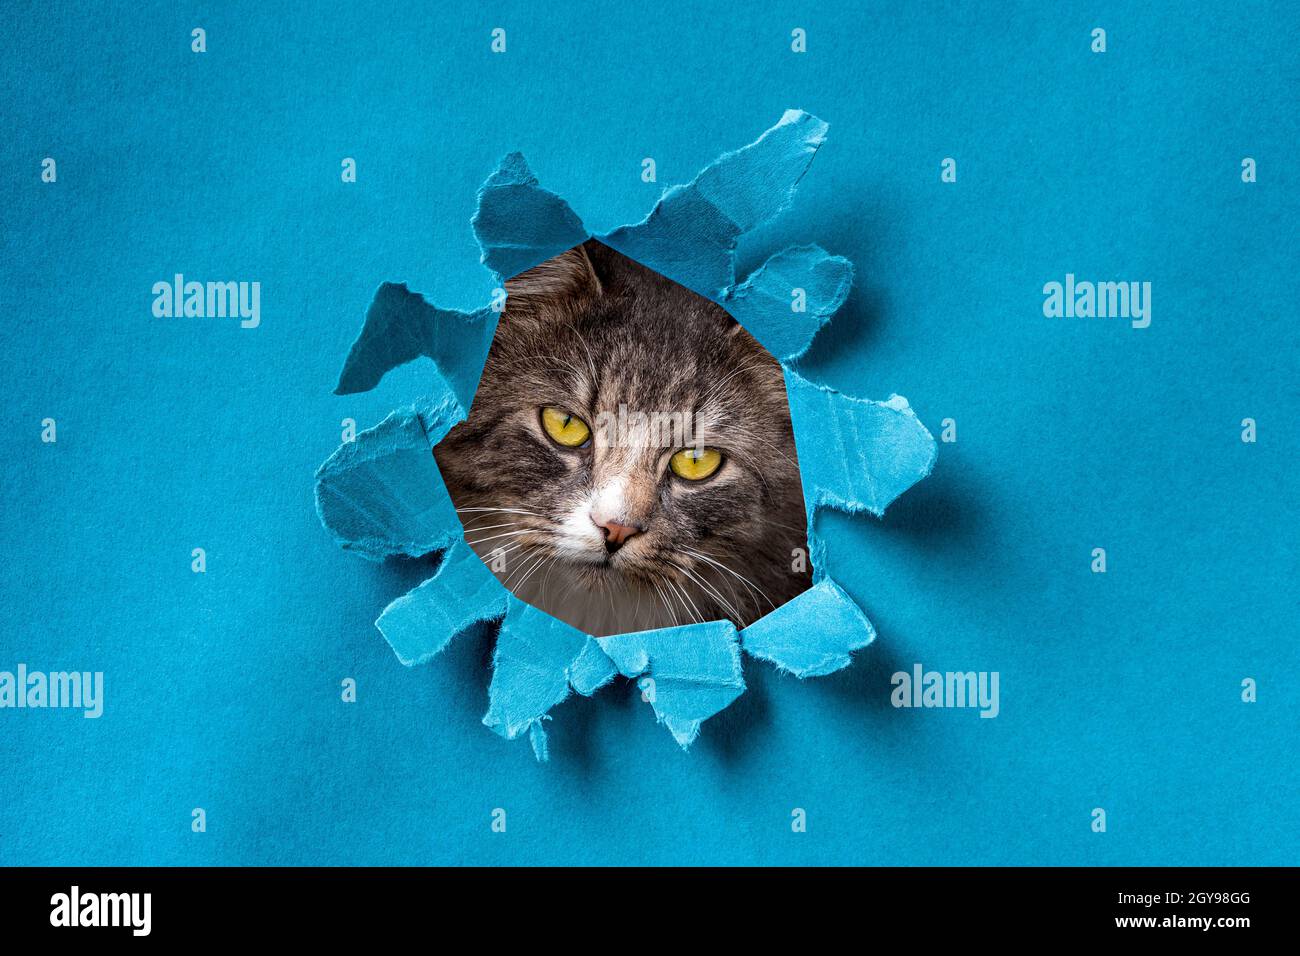 Funny cat looks through ripped hole in blue paper. Naughty pets and mischievous domestic animals. Stock Photo